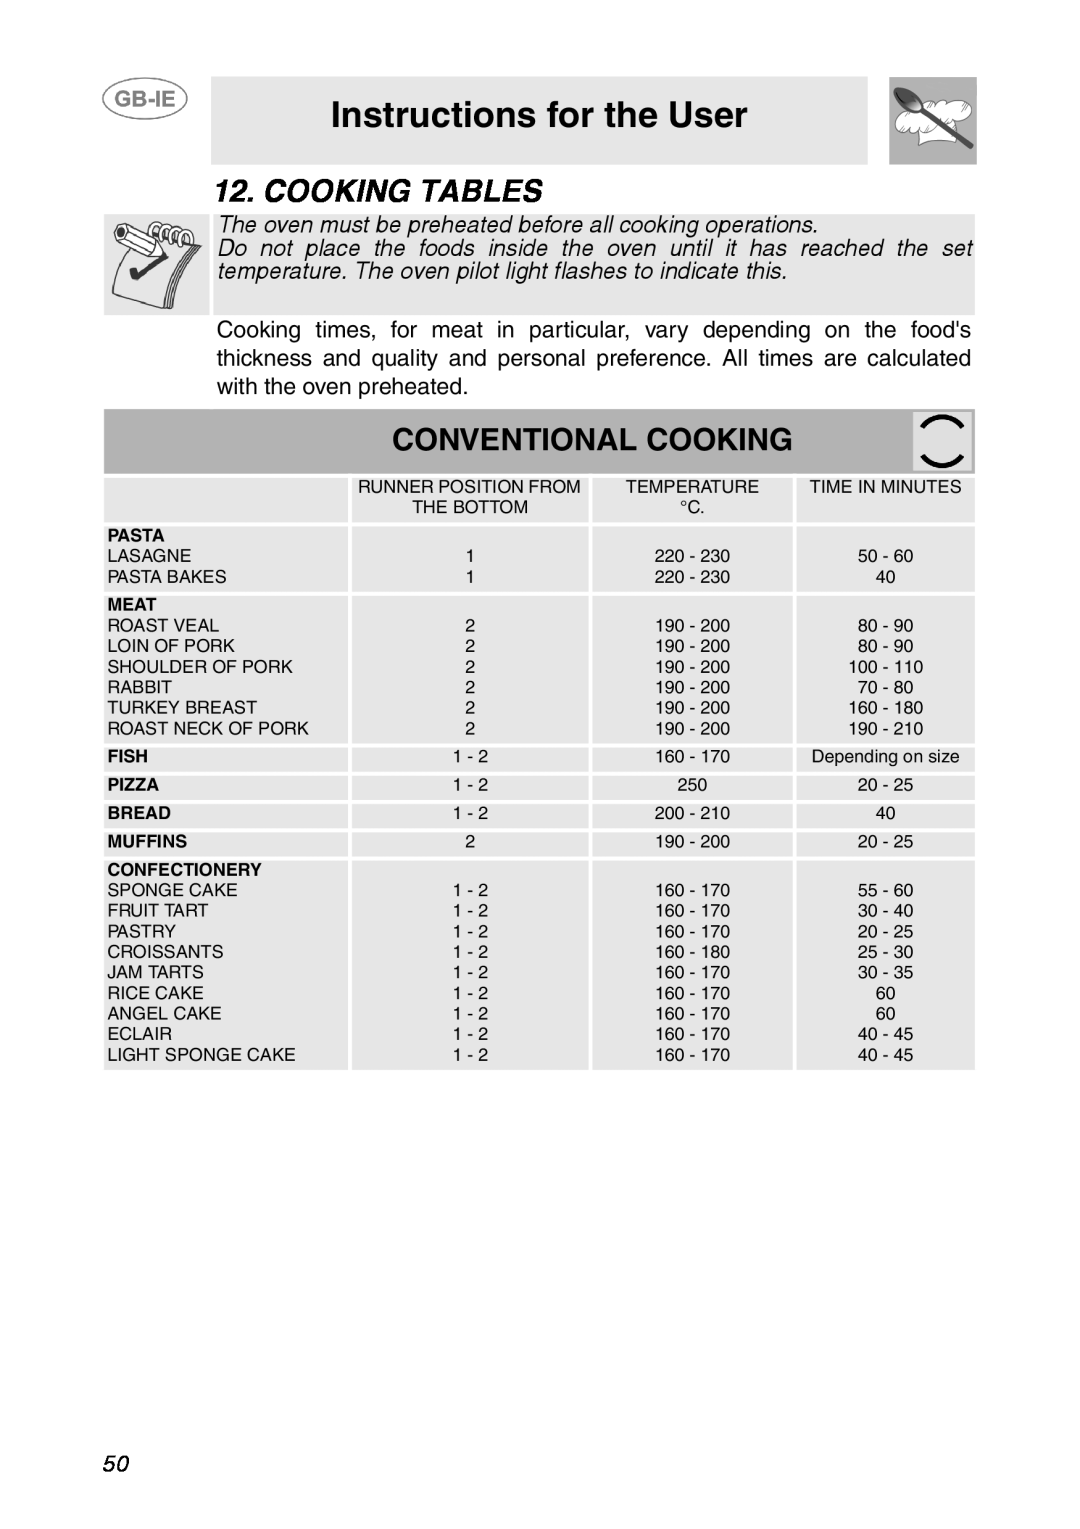 Smeg SE995XT-7 Cooking Tables, Conventional Cooking, Instructions for the User, Pasta, Meat, Fish, Pizza, Bread, Muffins 